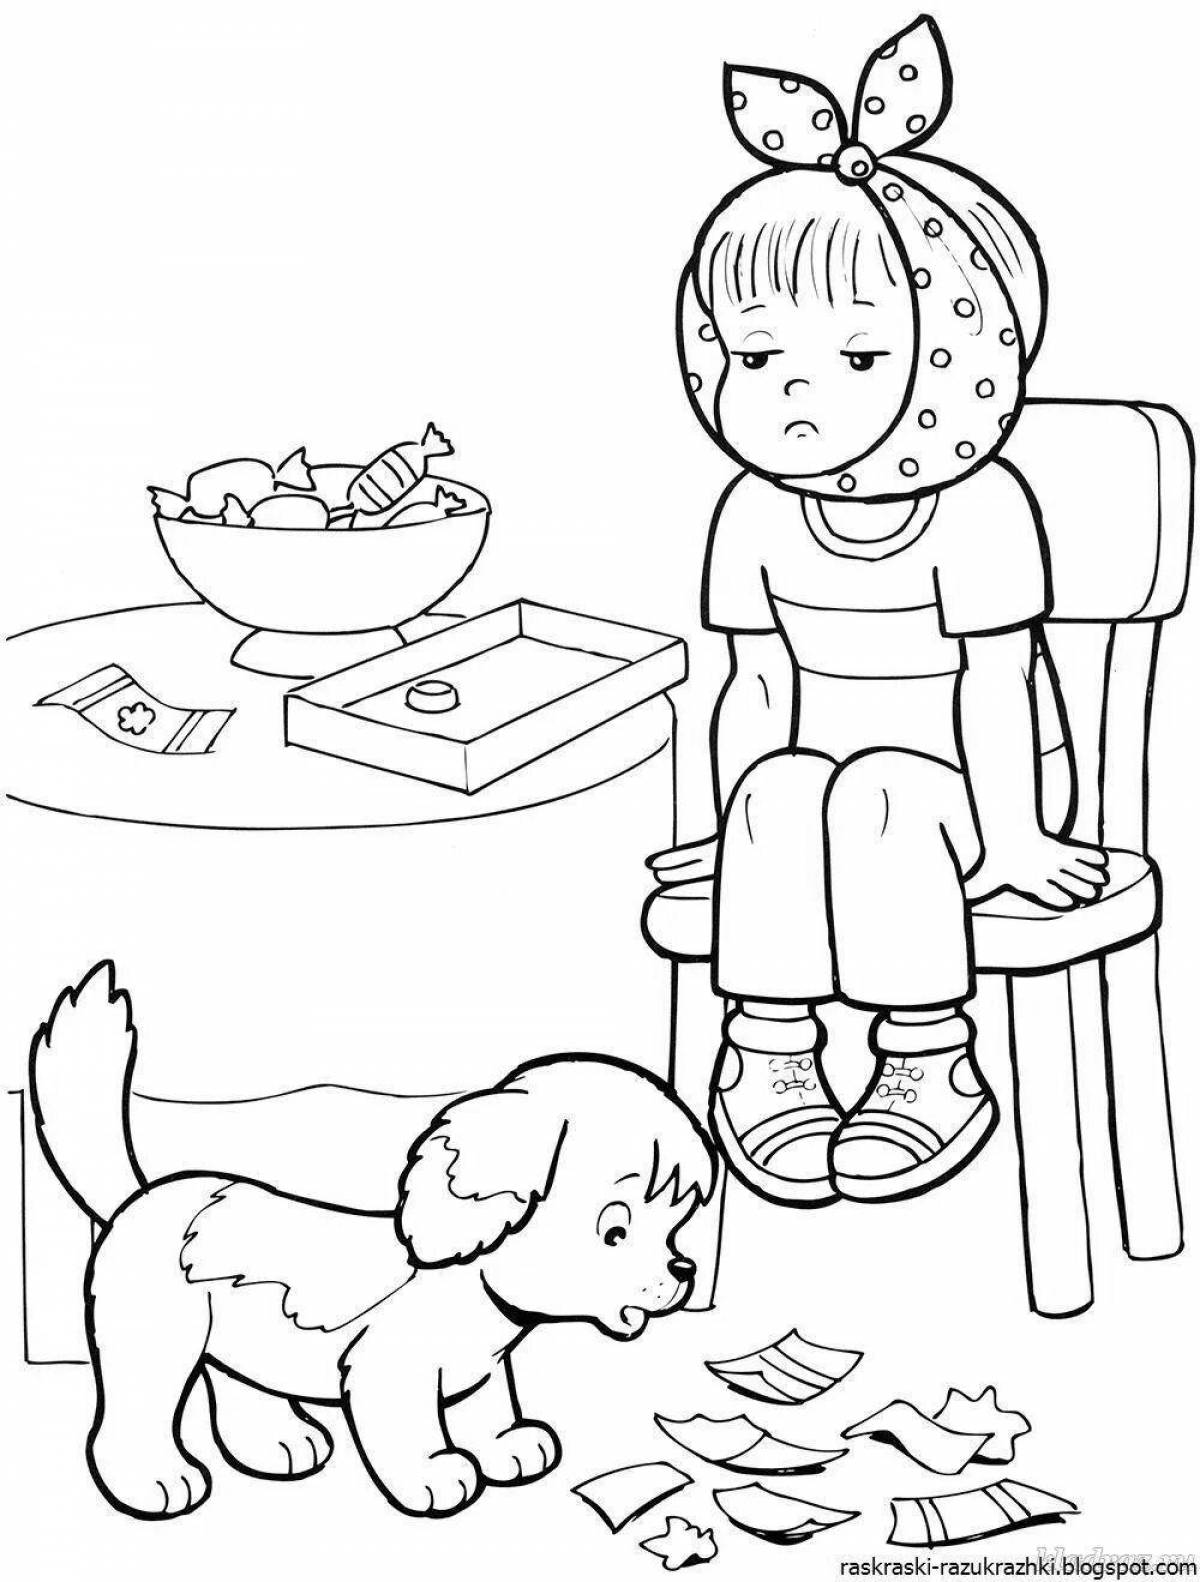 Revived health coloring page for the elderly